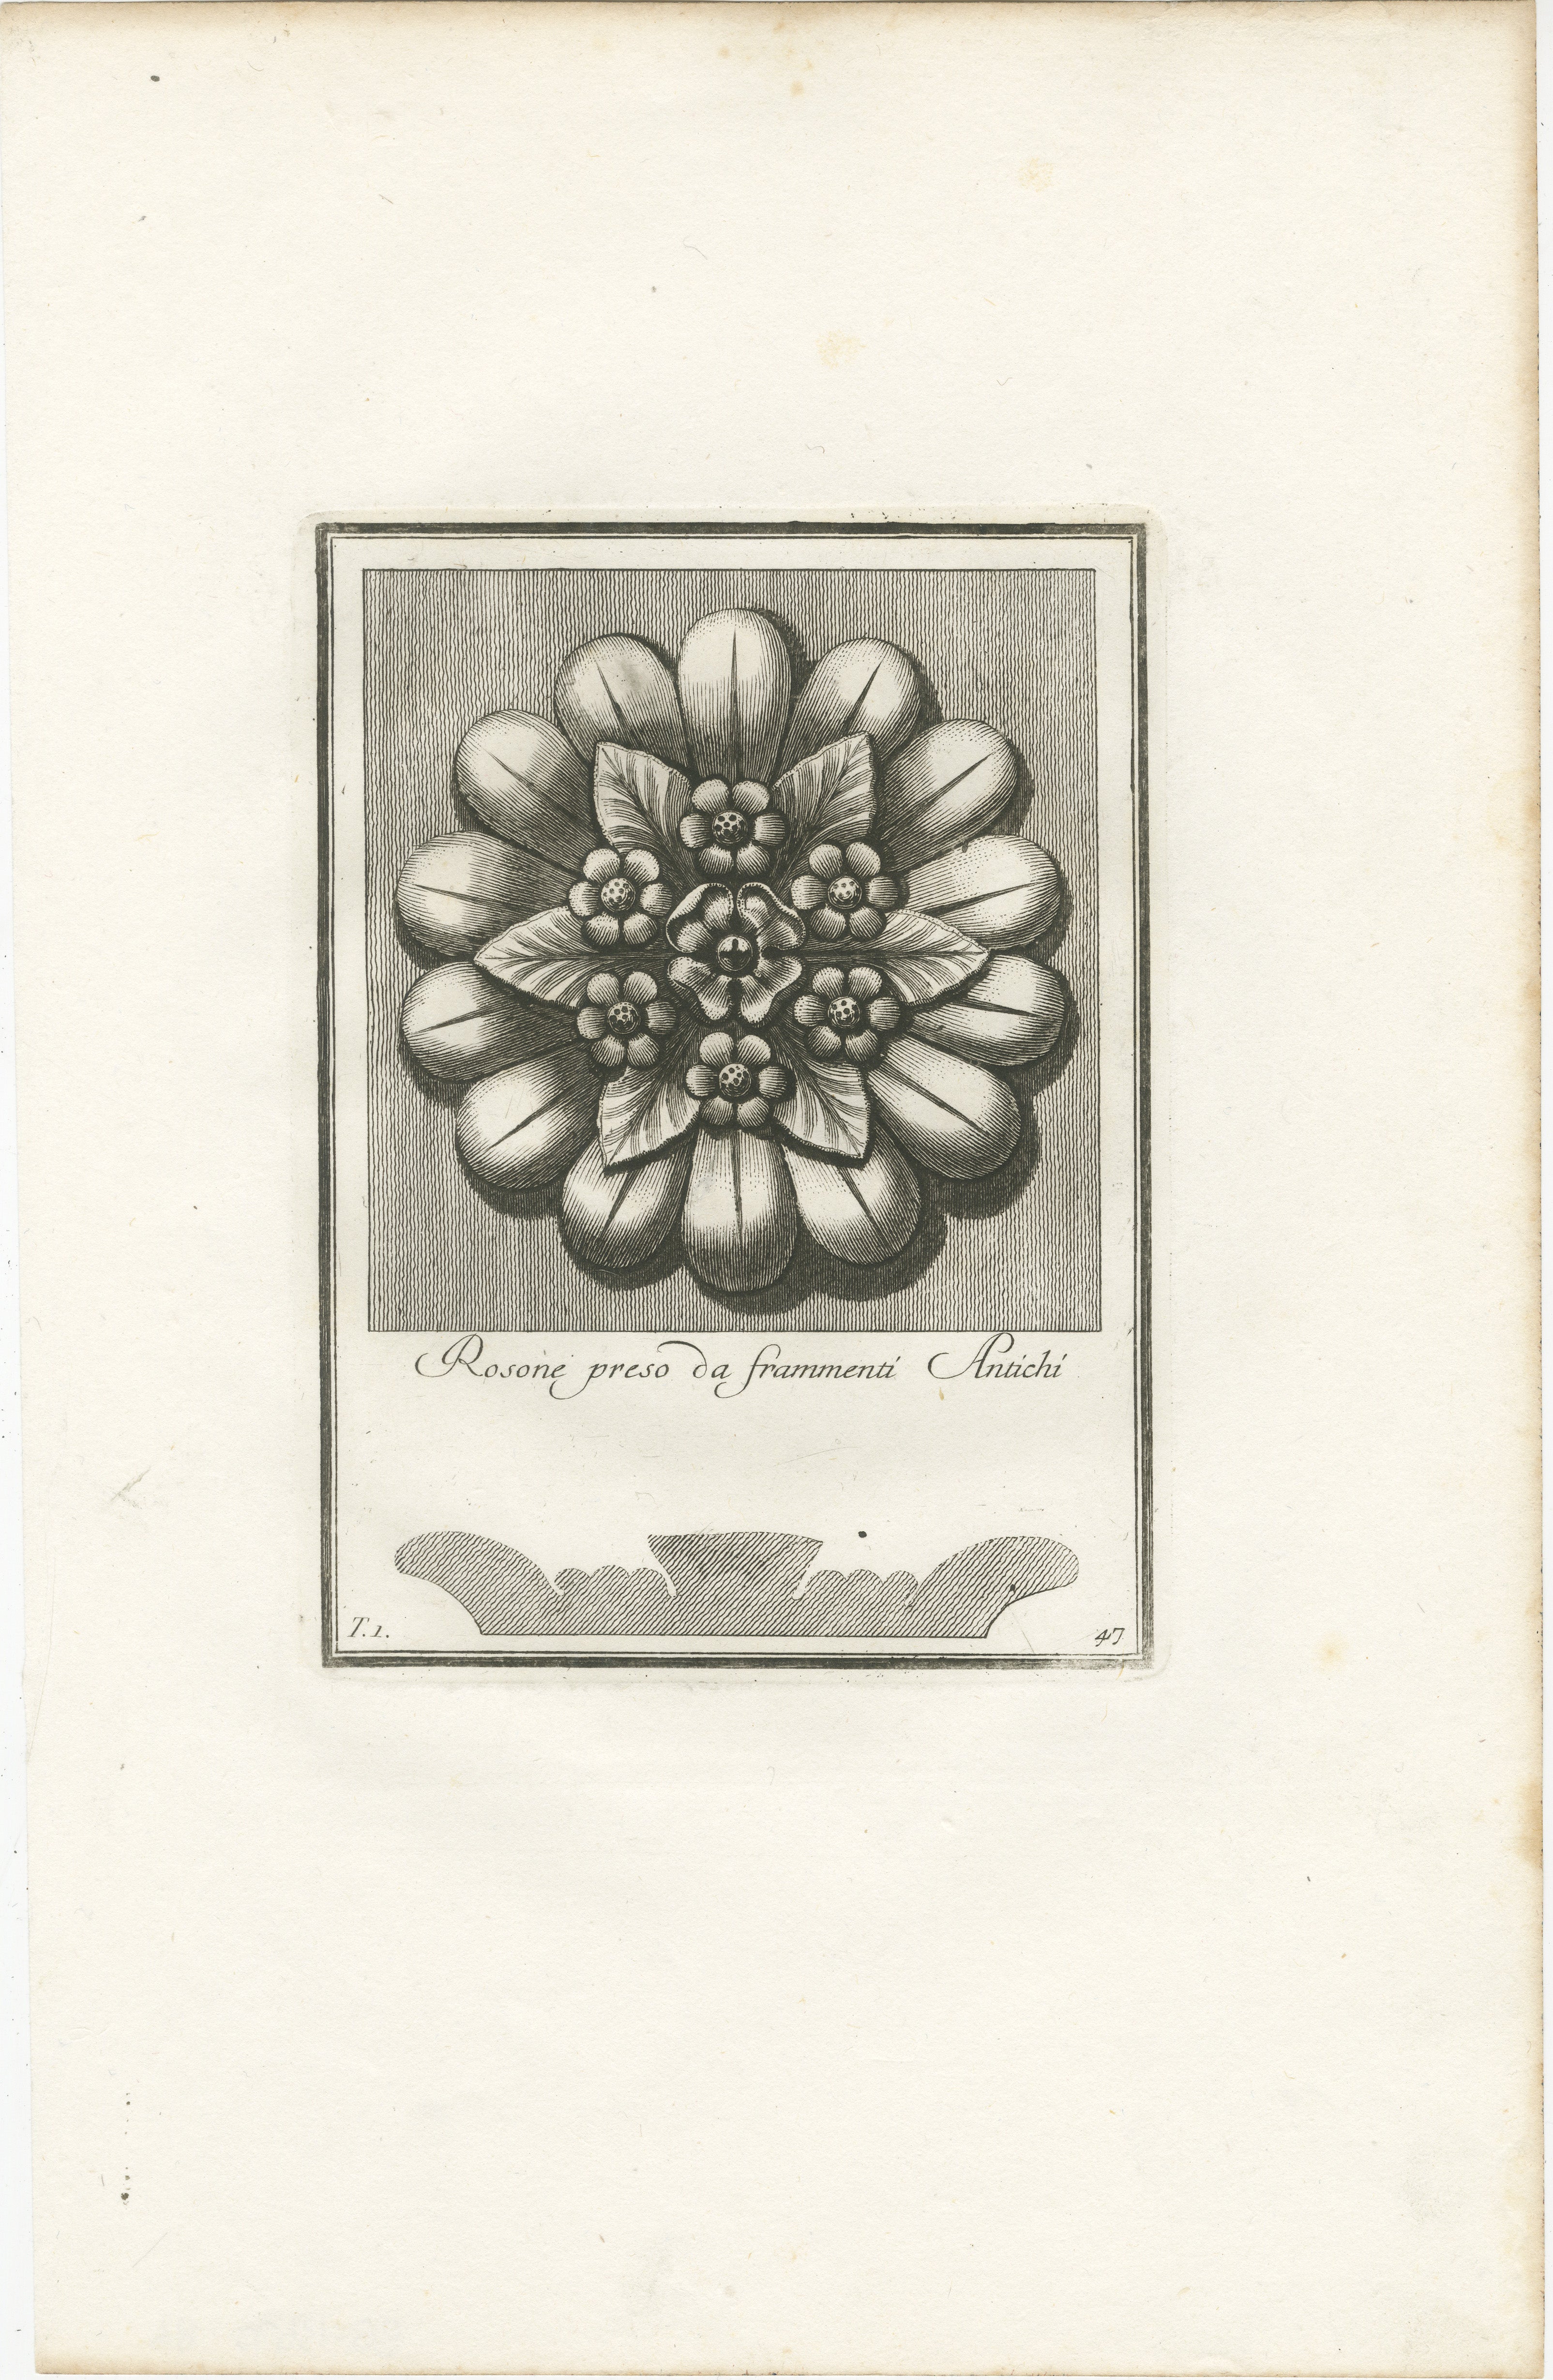 This engraving, titled 